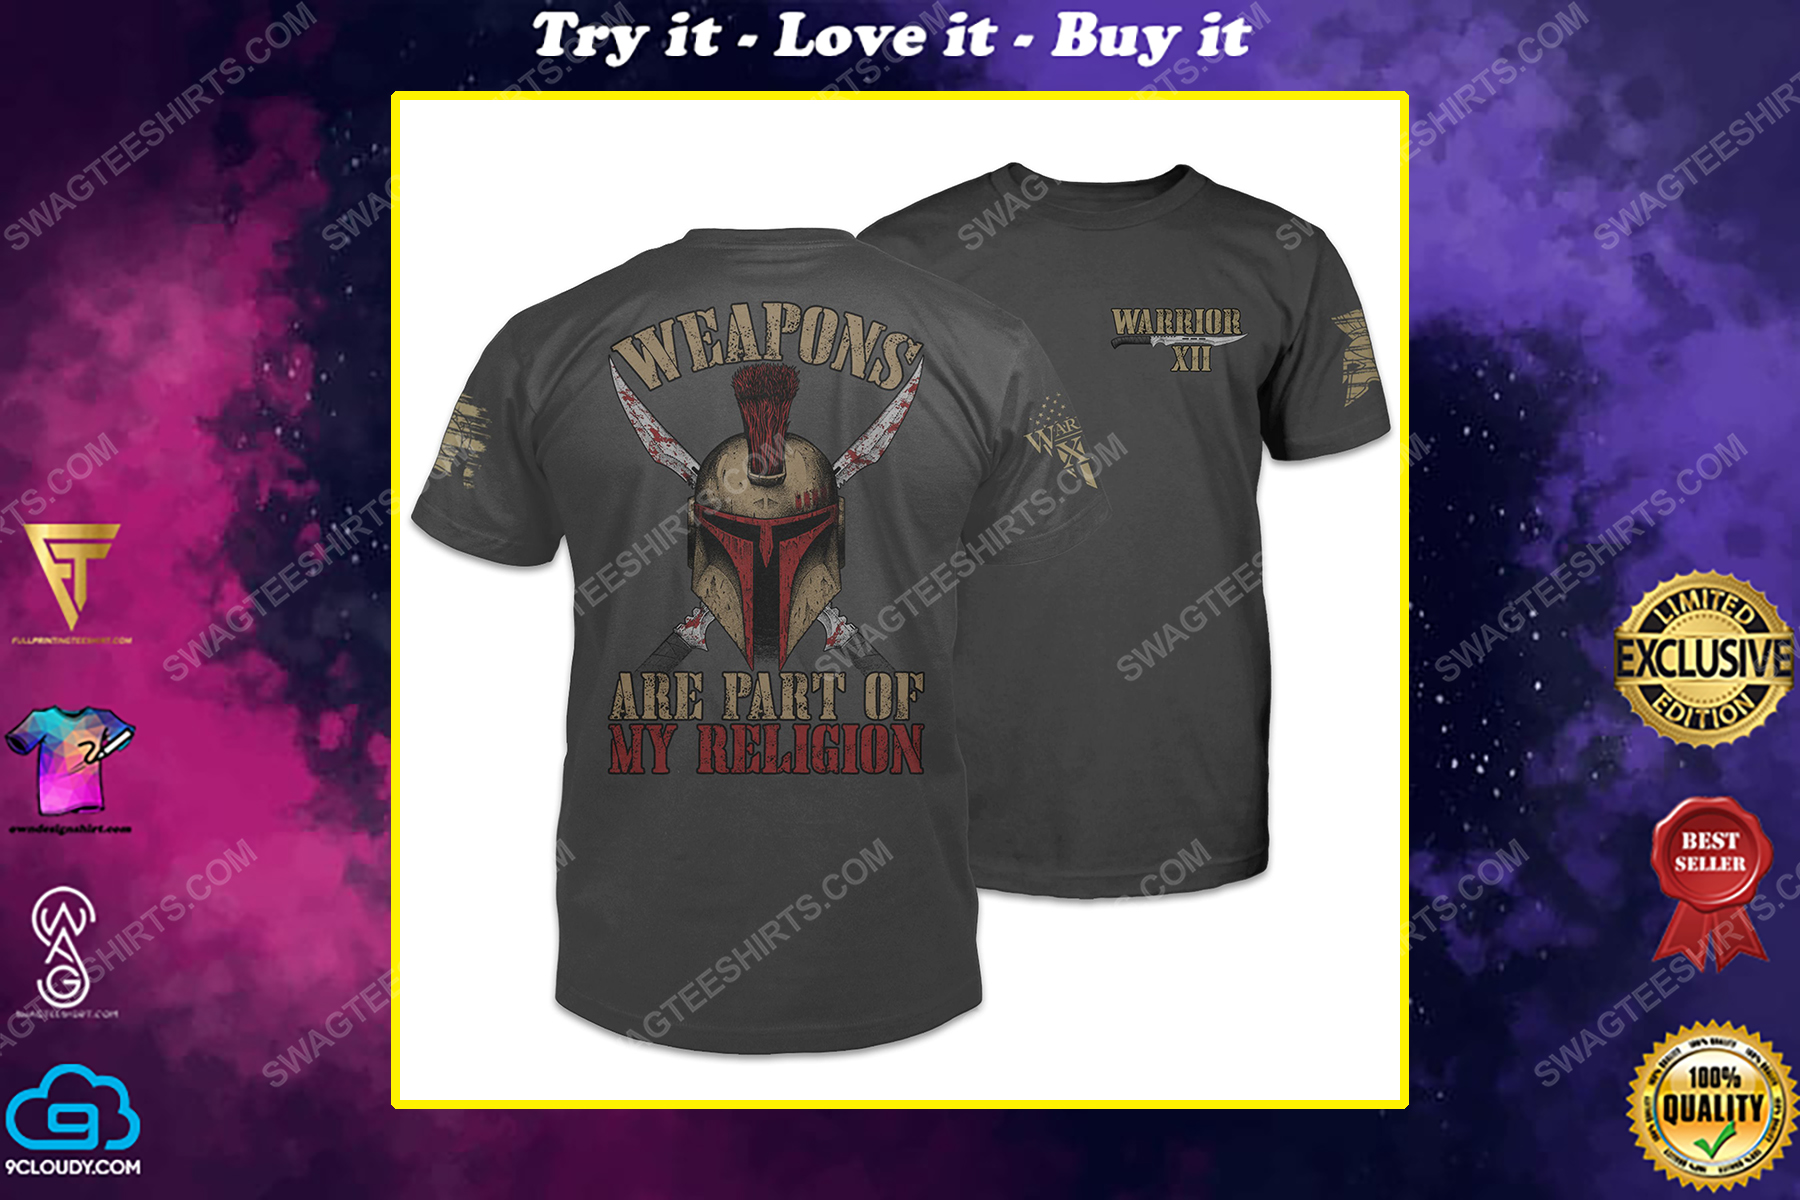 Weapons are part of my religion warrior american flag patriotic shirt